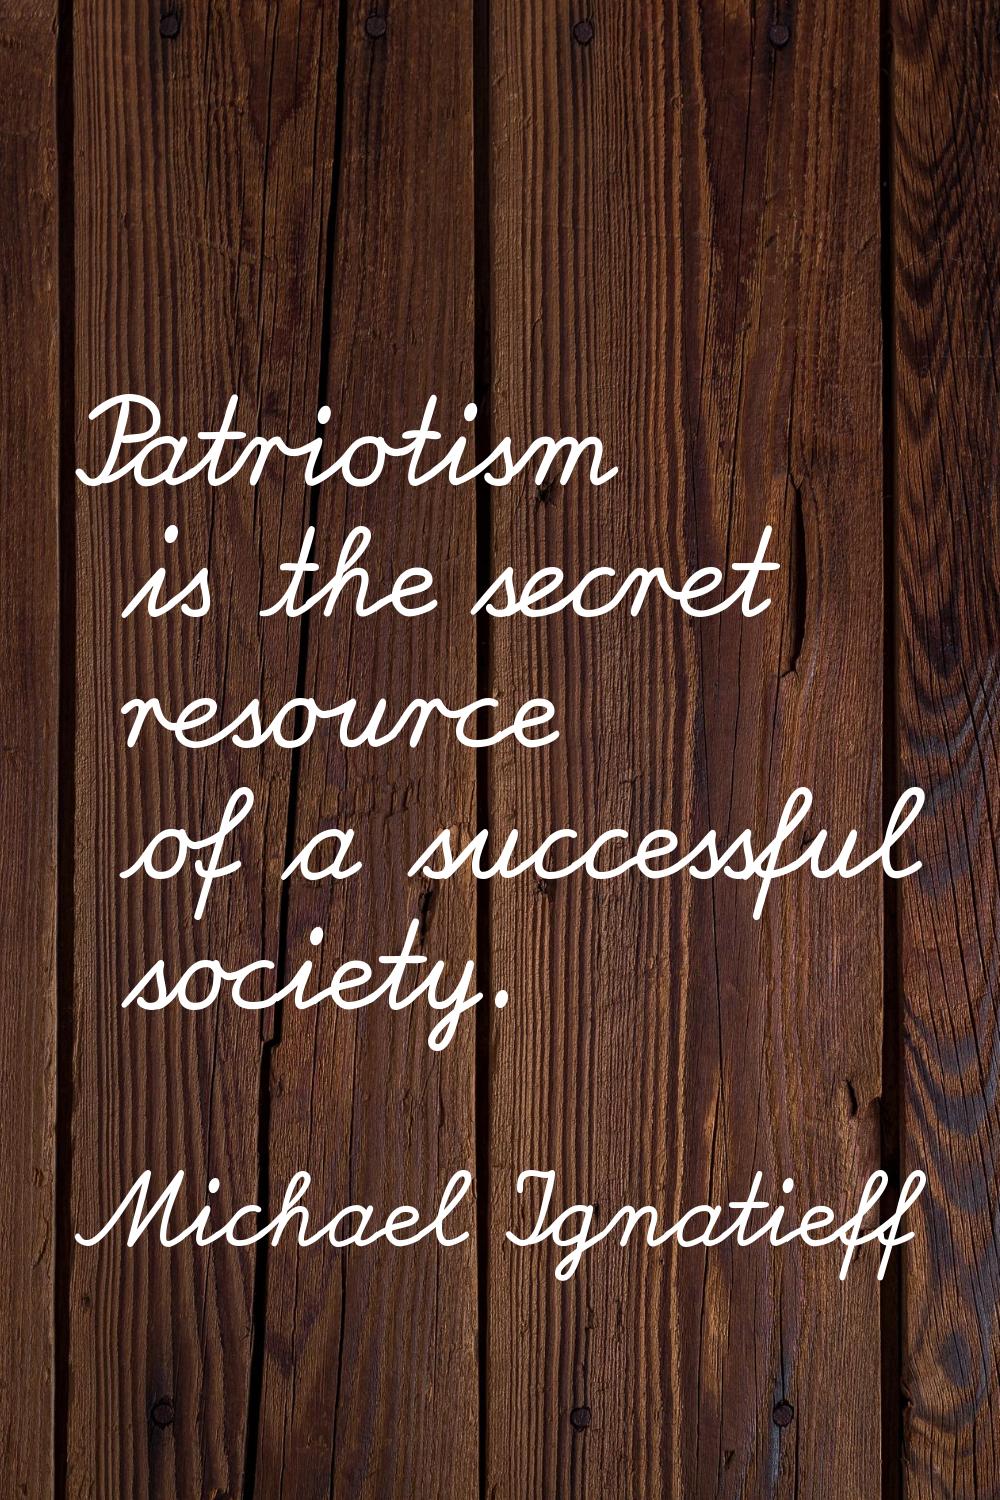 Patriotism is the secret resource of a successful society.